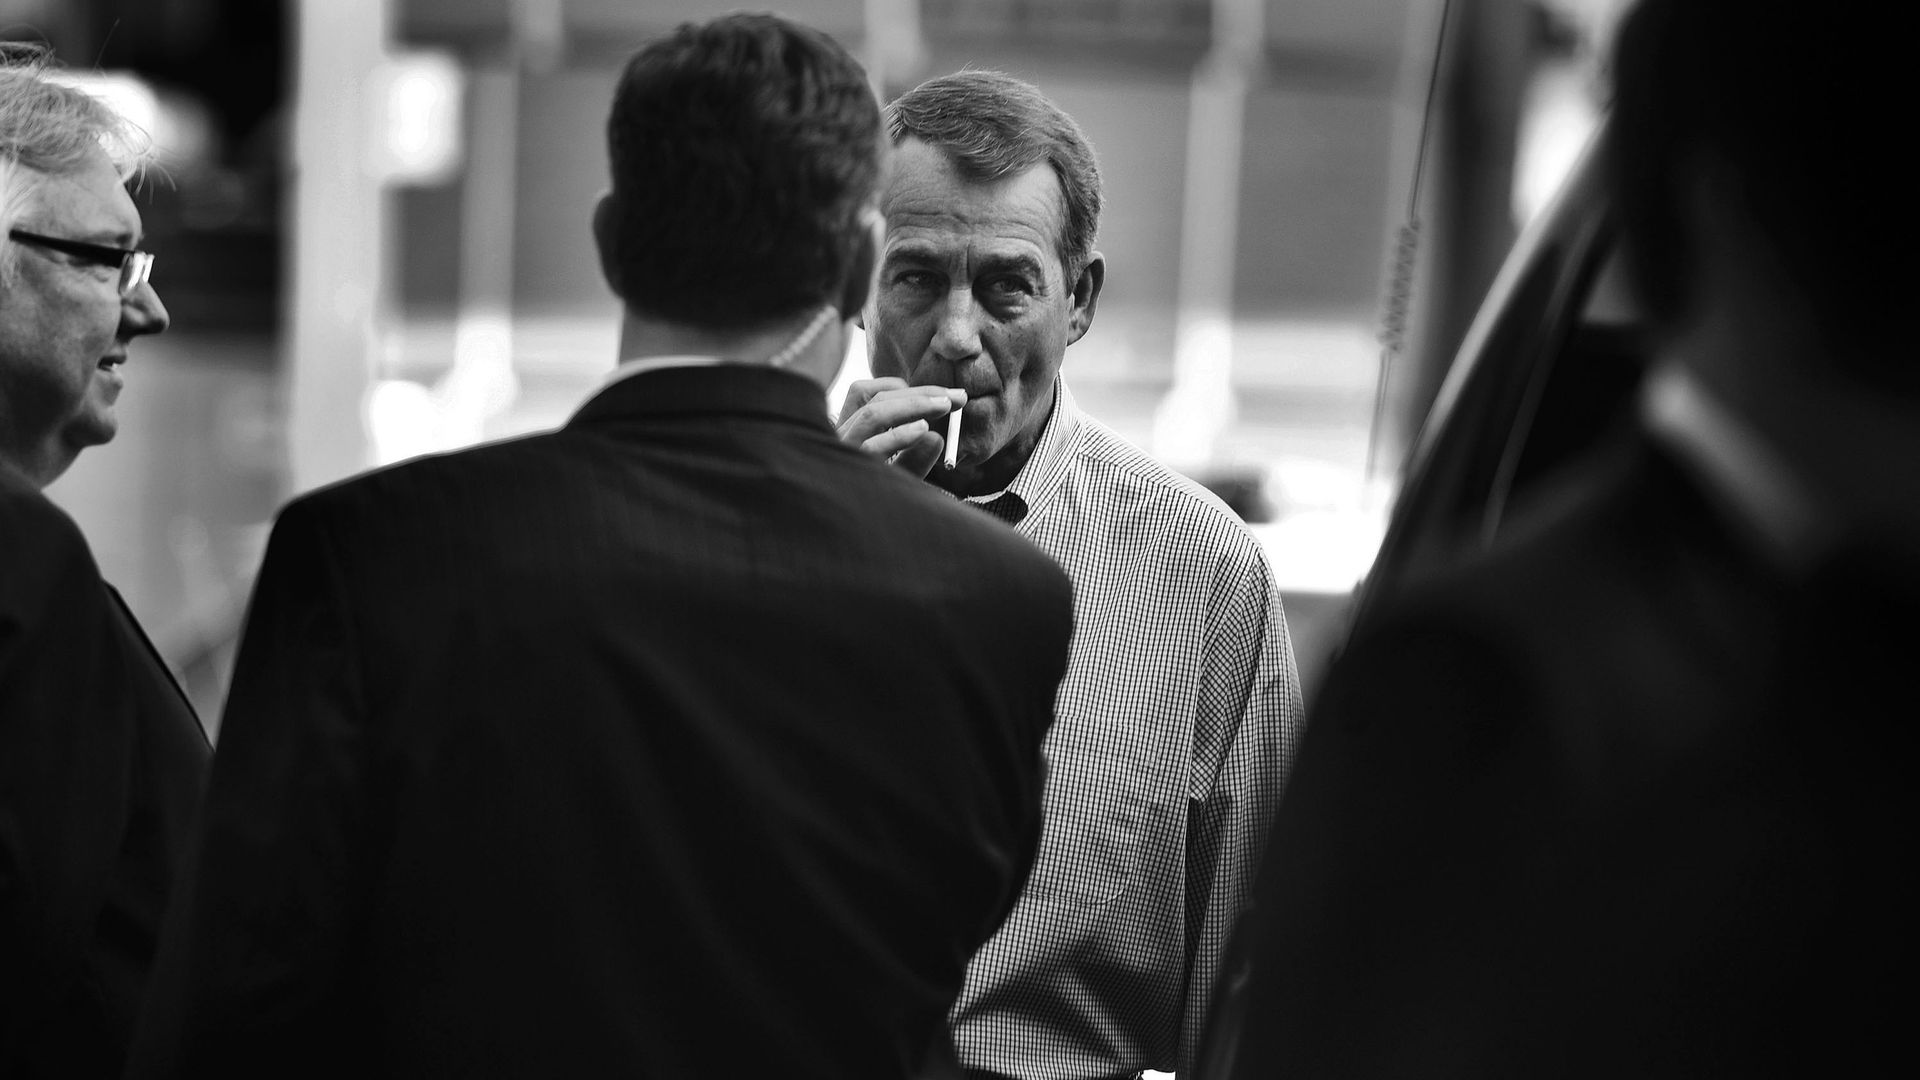 Then-House Minority Leader John Boehner is seen smoking a cigarette after an event in 2010.